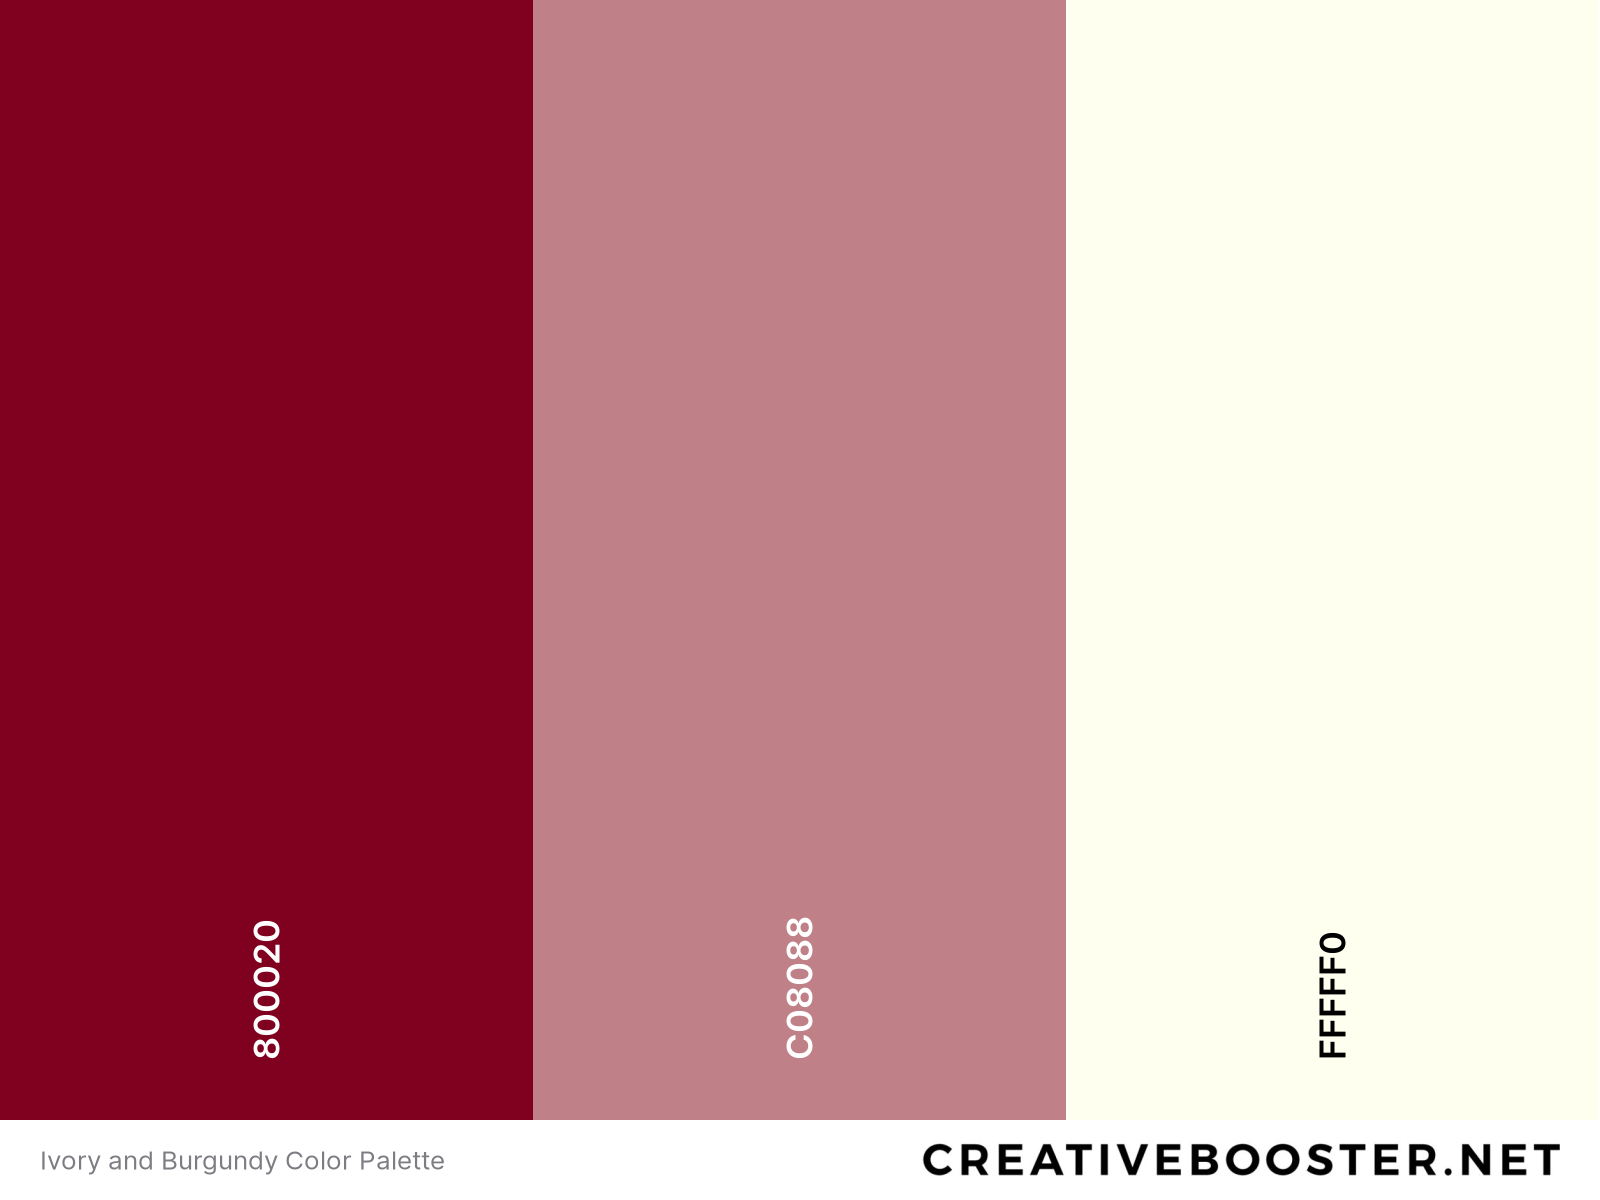 Ivory and Burgundy Color Palette